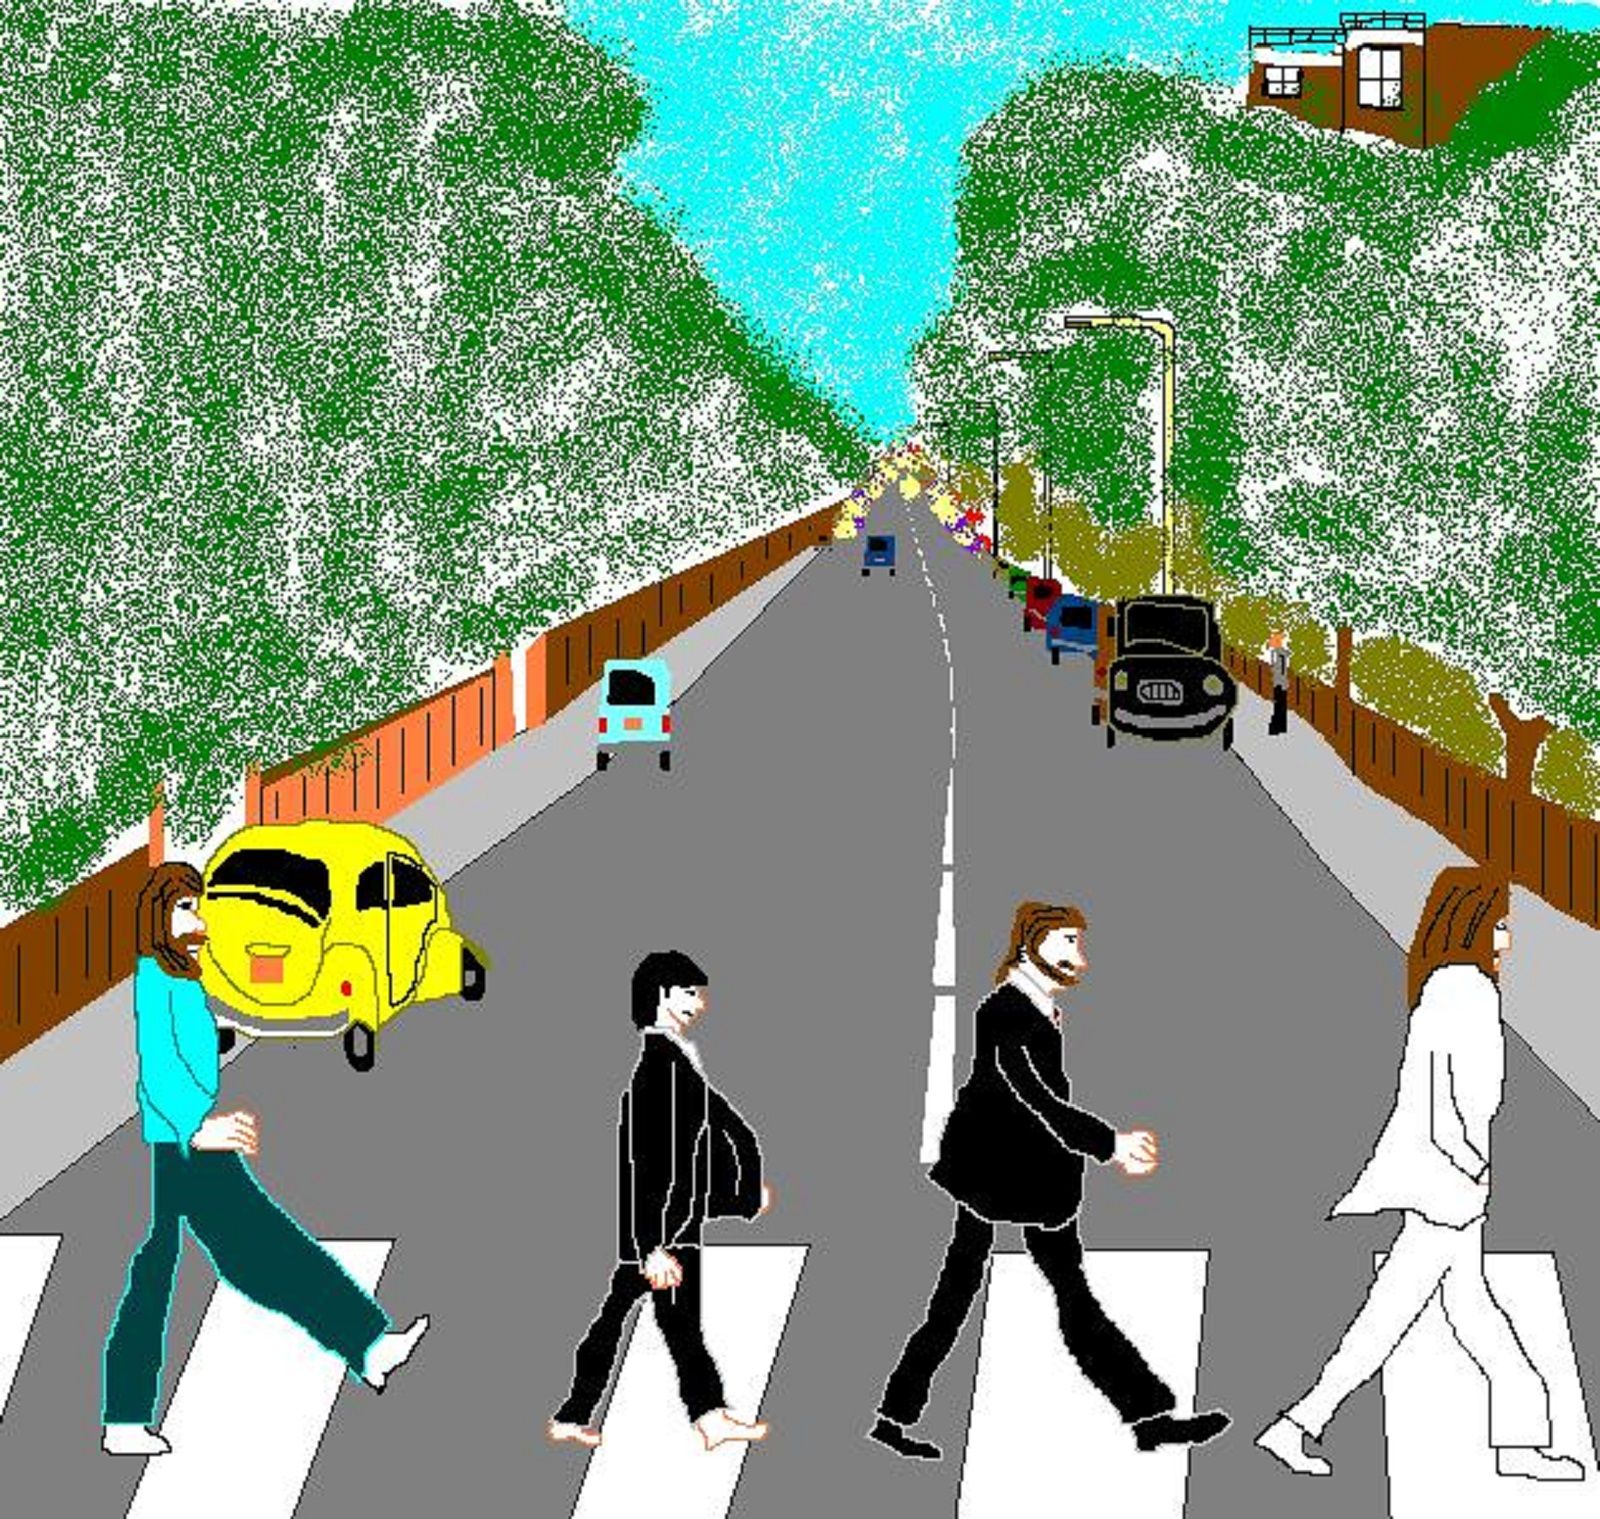 25 hilarious album covers recreated in MS Paint image 5